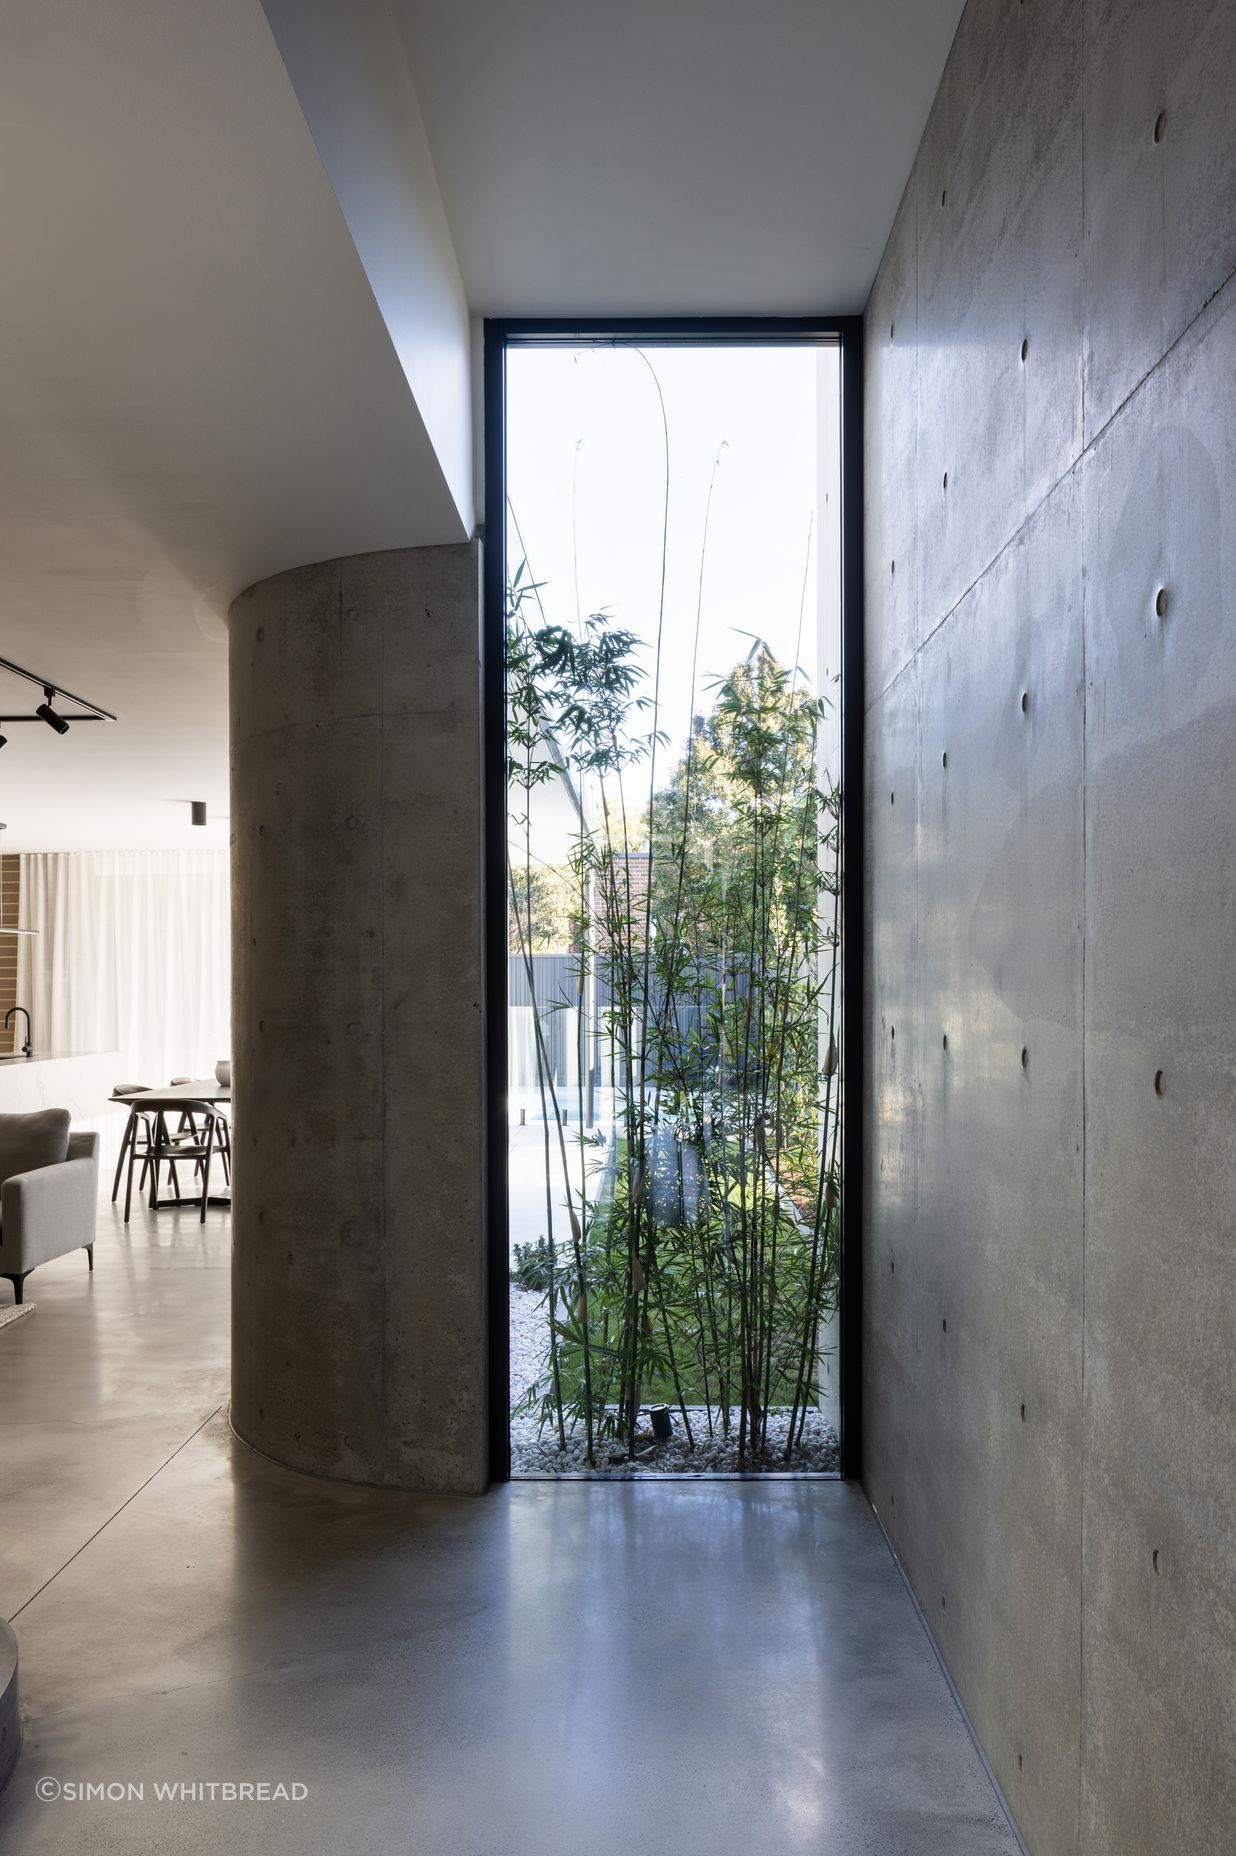 A floor to ceiling window displaying greenery lightens the polished concrete.